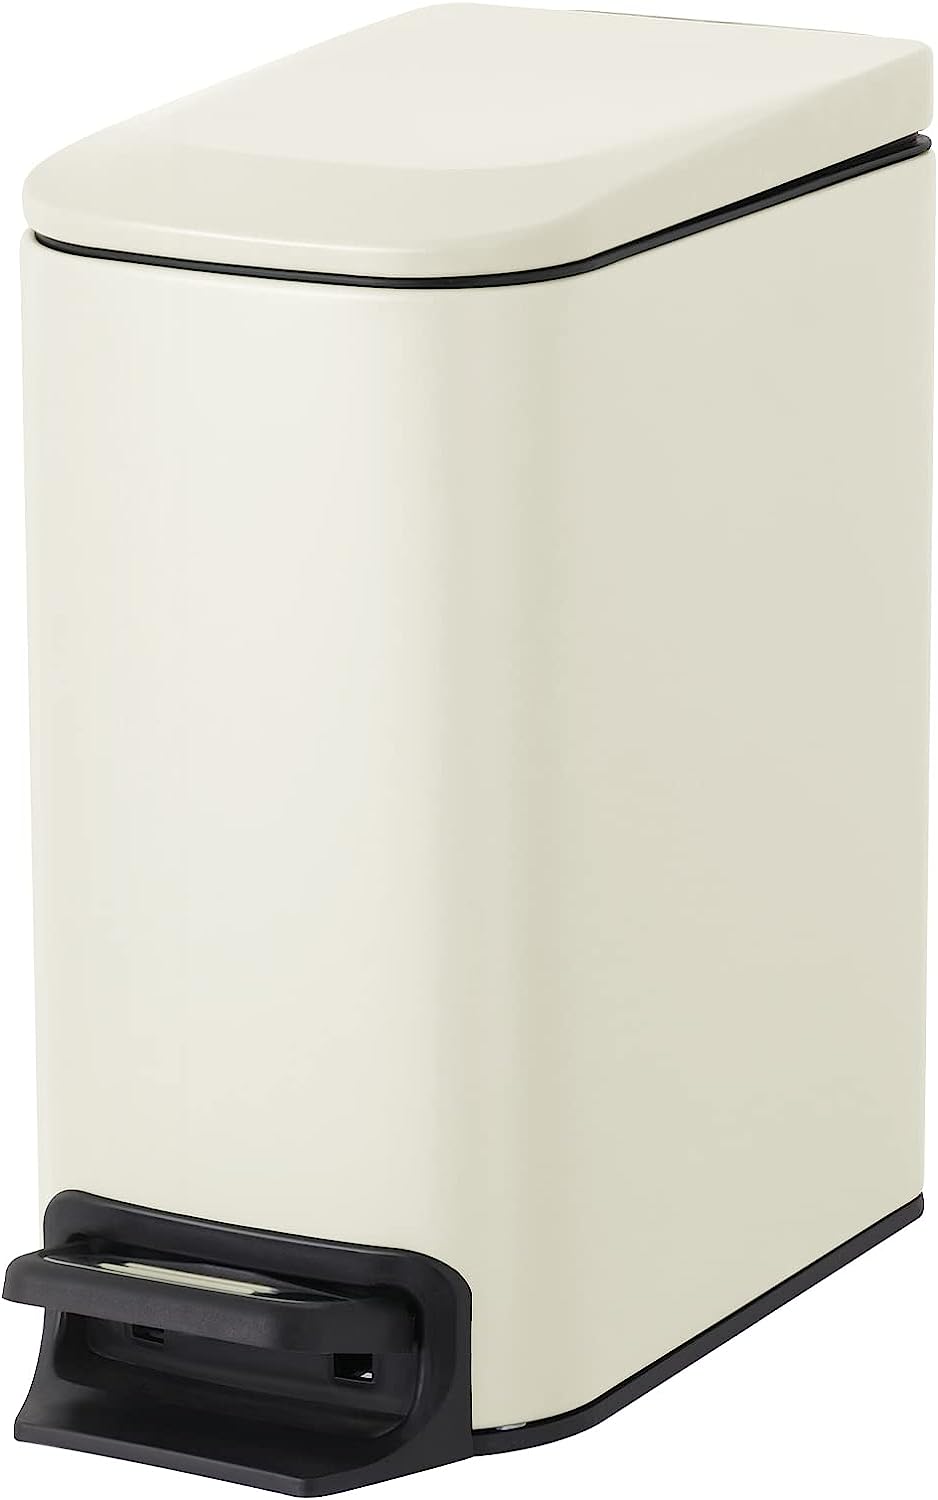 Cesun Small Bathroom Trash Can with Lid Soft Close, Step Pedal, 6